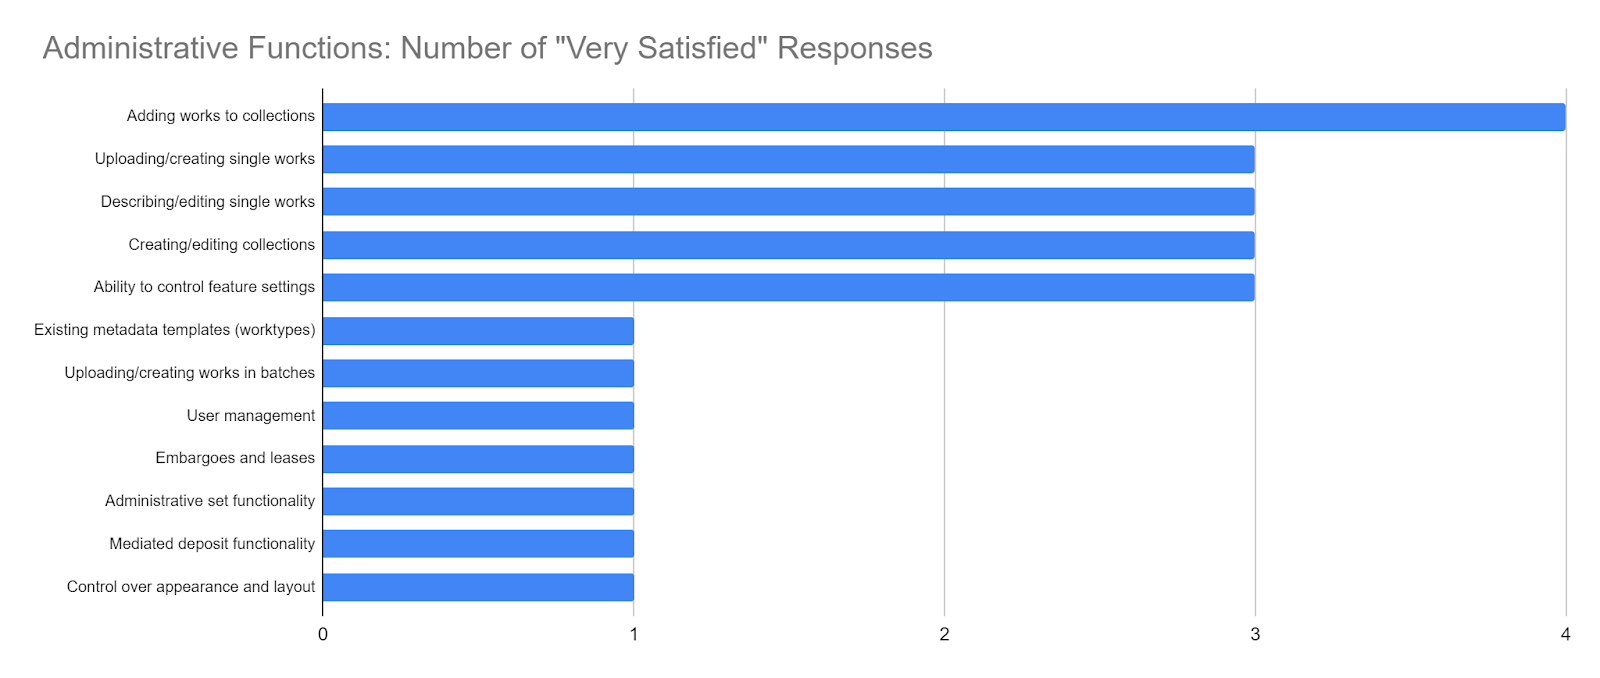 Bar graph of number of very satisfied responses for admin functions. 4: Adding works to collections; 3: uploading single works, describing single works, creating/editing collections, control feature settings; 1: worktypes, uploading in batches, user management, emabrgos and leases, admin sets, mediated deposit, appearance control